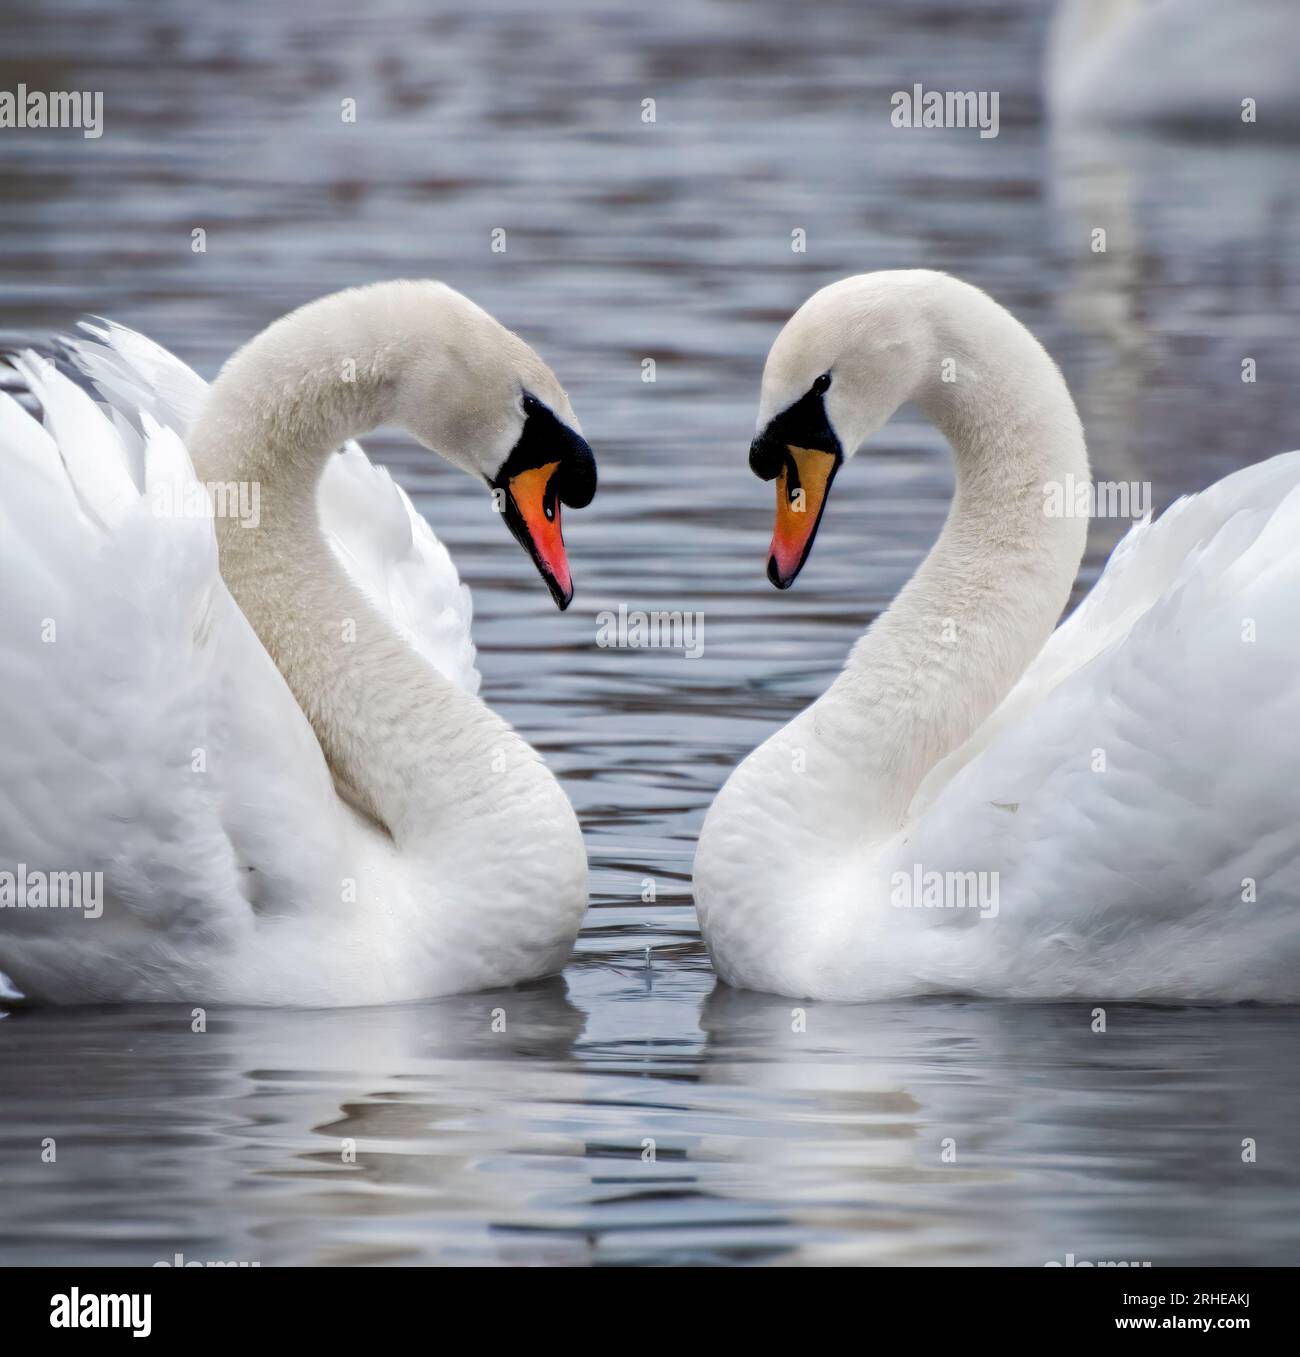 Two mute swans swimming and facing each other to form a heart shape with their necks Stock Photo